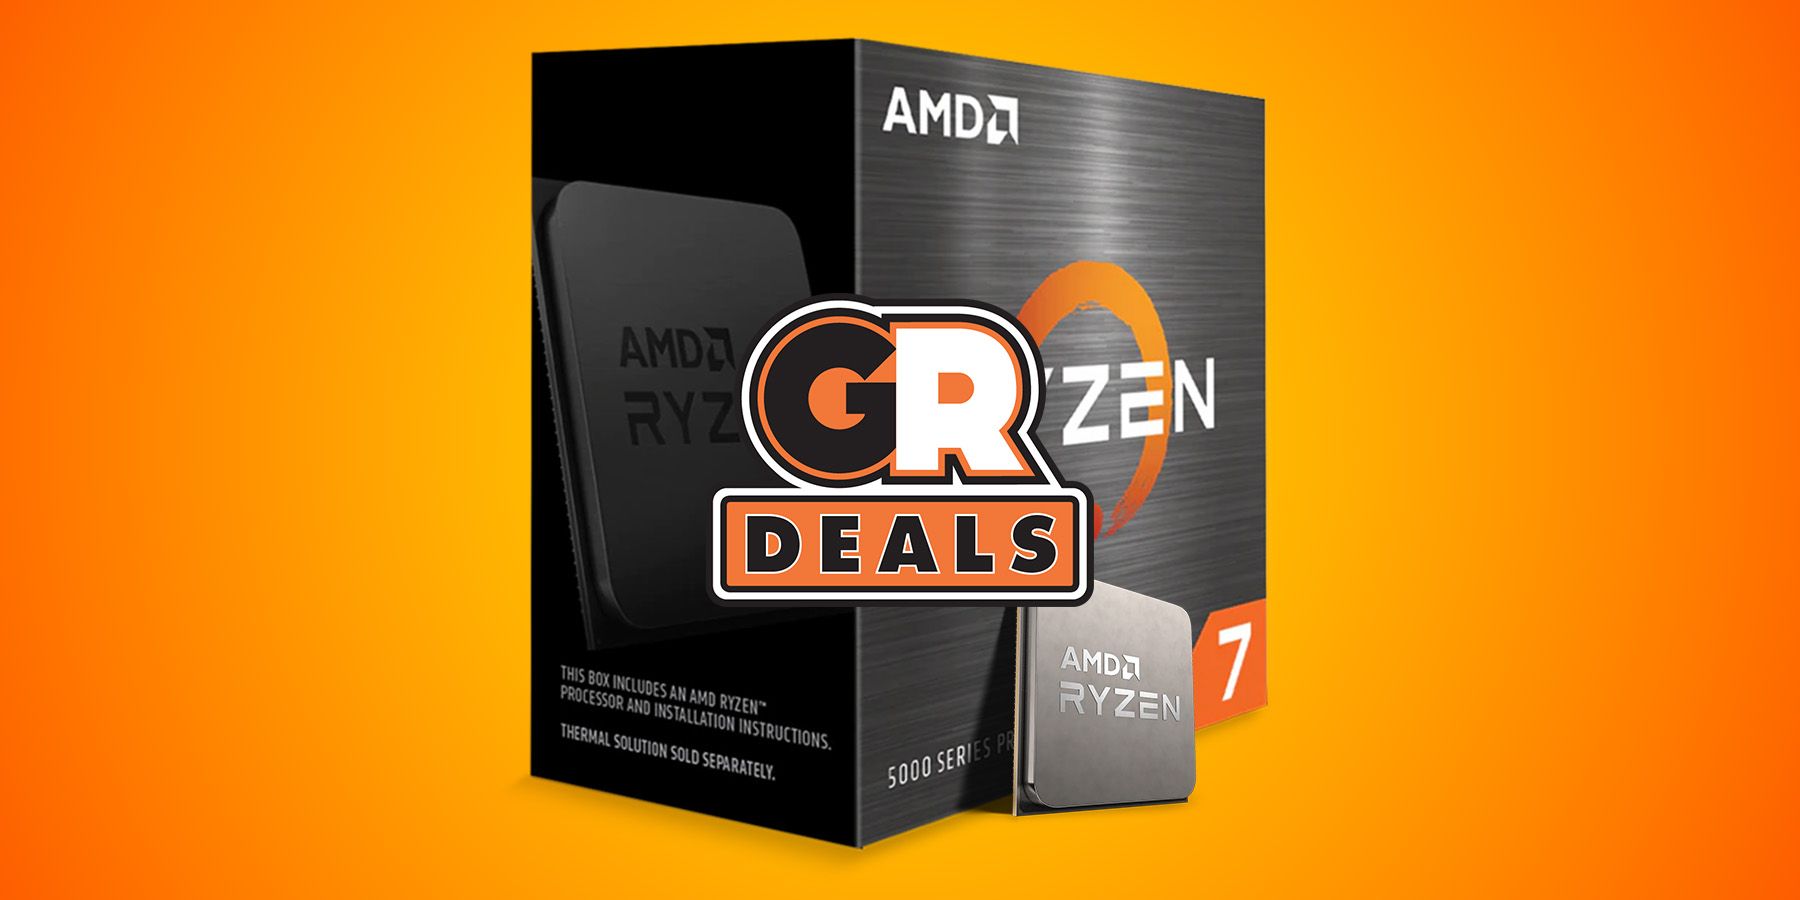 Act Fast and Get 50% Off on a AMD Ryzen 7 5700G CPU